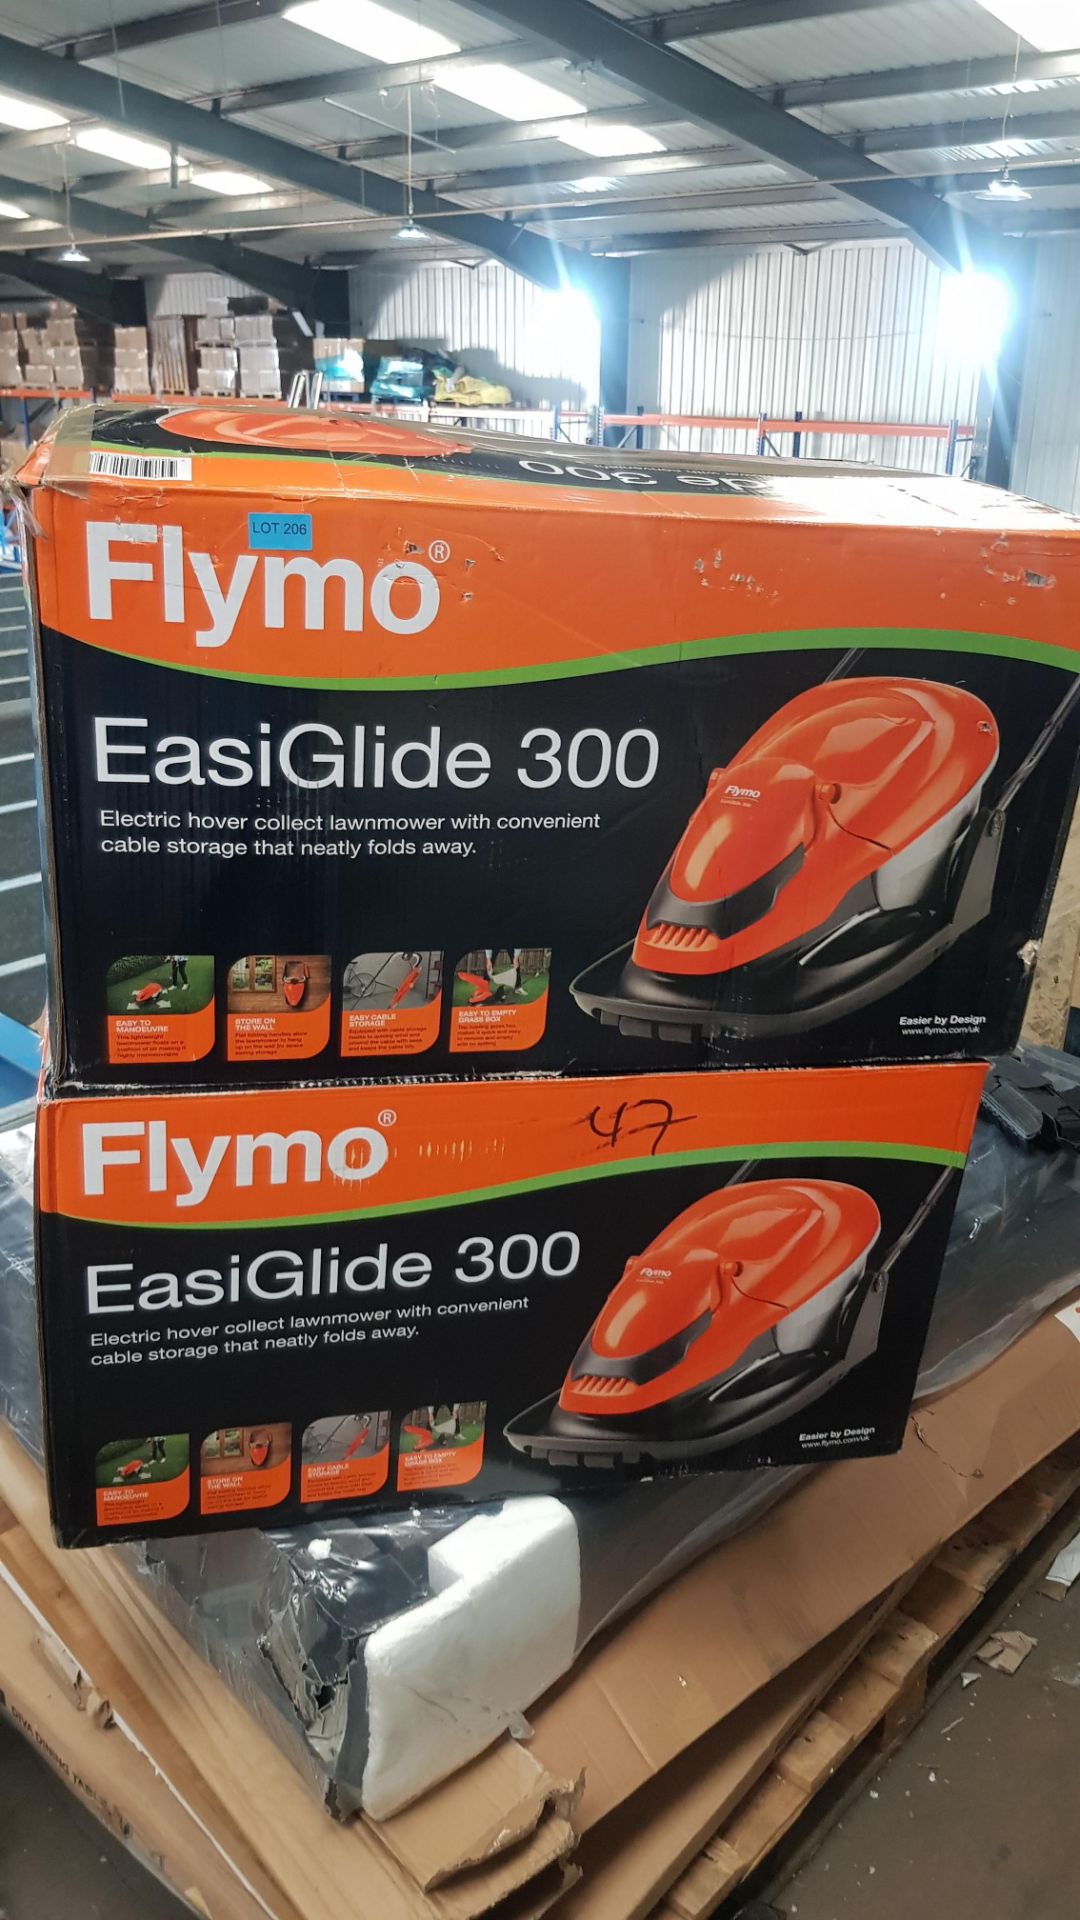 (P7) 2x Flymo EasiGlide 300 Electric Hover Collect Lawnmower RRP £139 Each. - Image 3 of 3